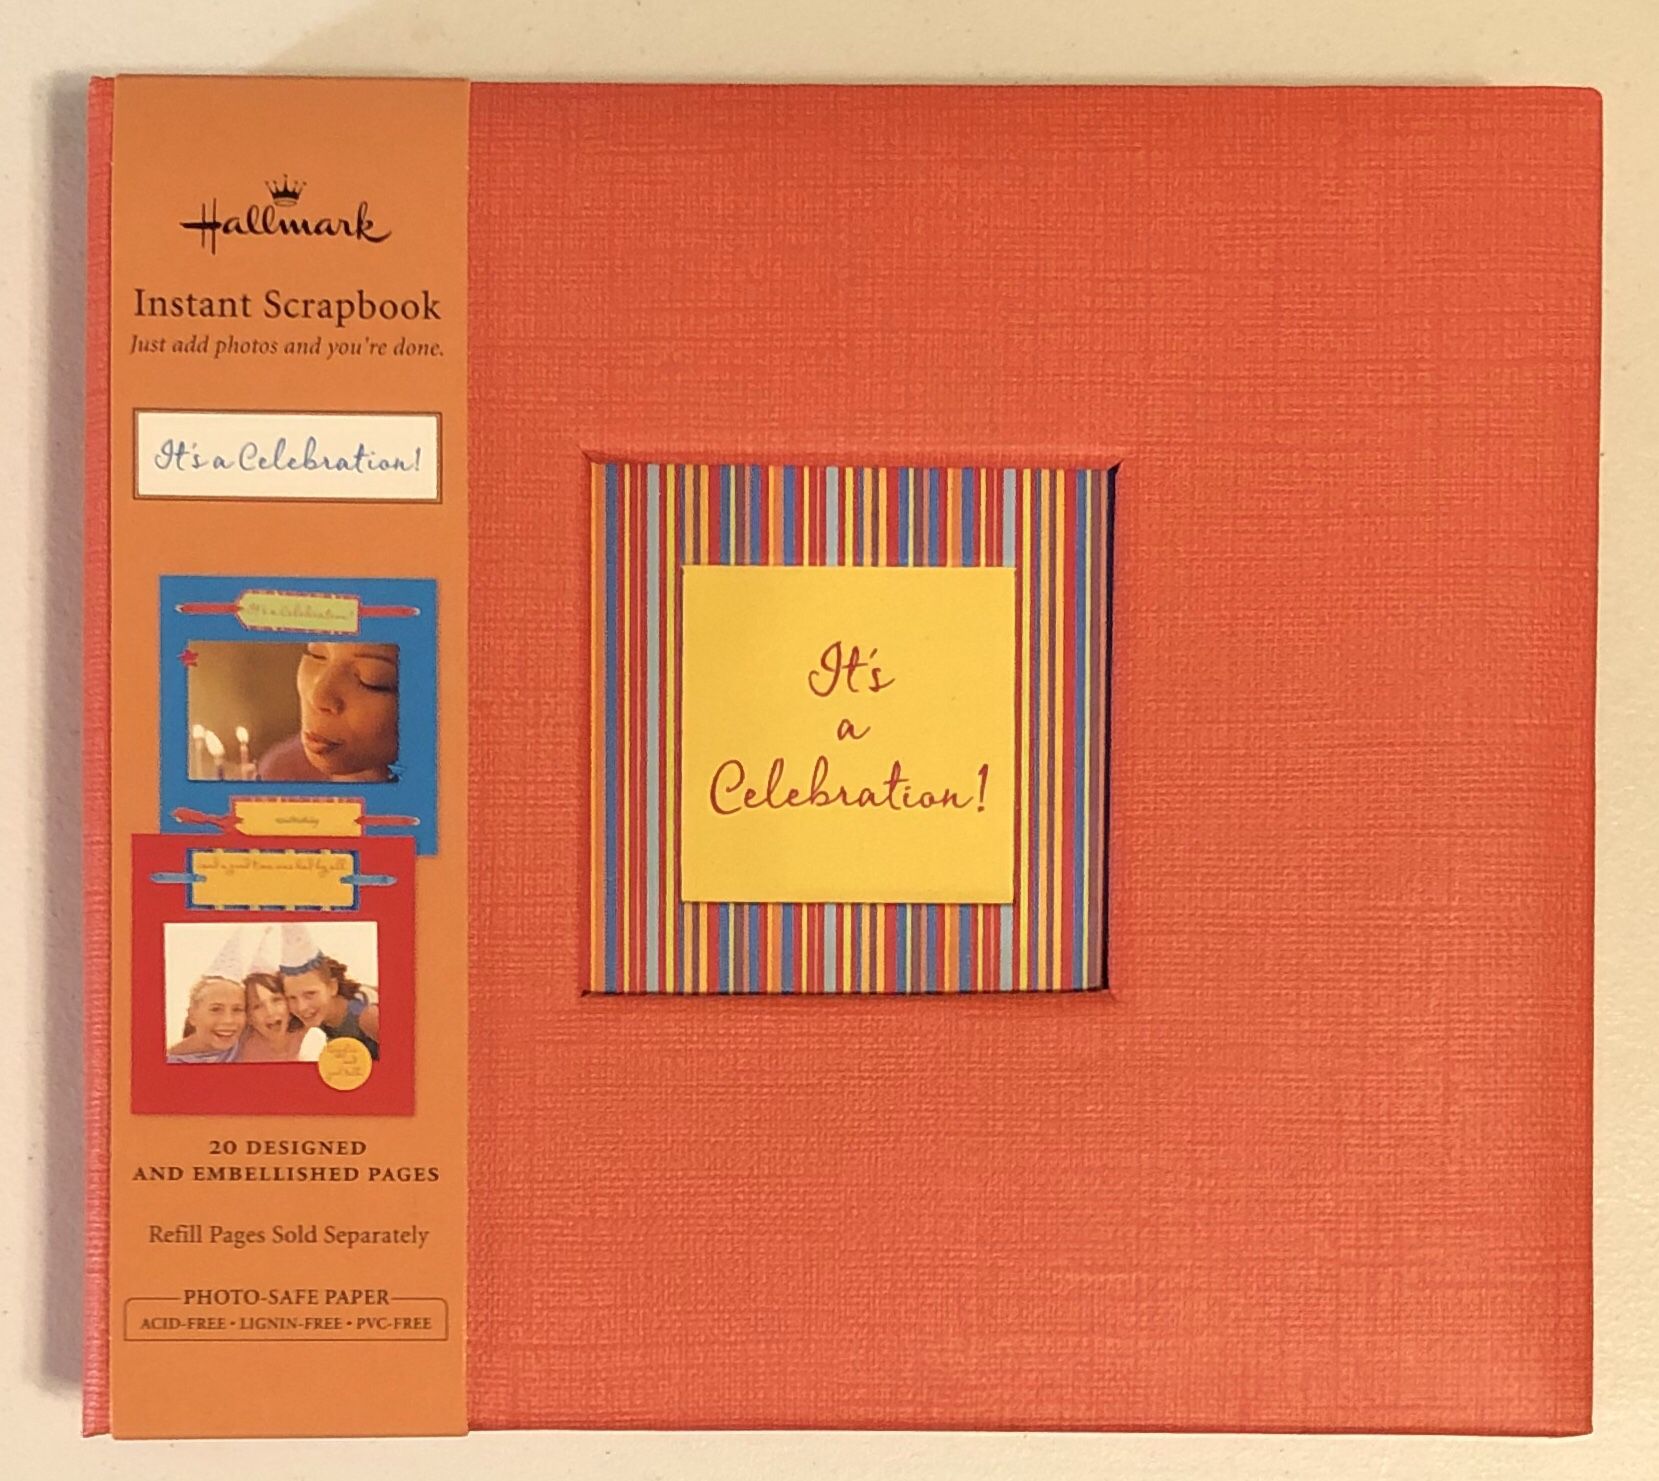 Hallmark Instant Scrapbook “It’s a Celebration” Just add photos and you’re done! (Brand New)